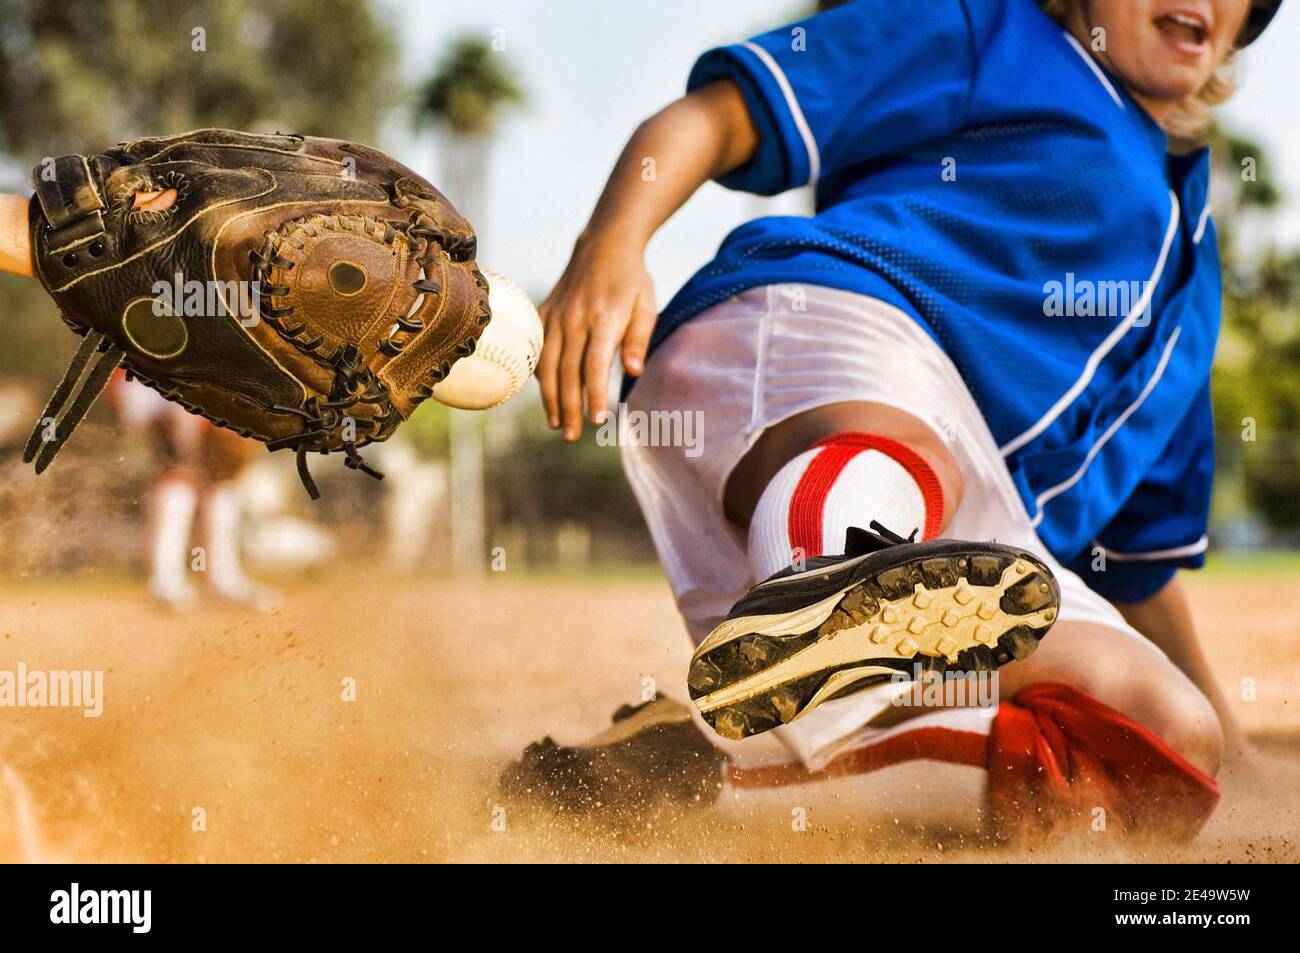 Cropped photo of softball player sliding into home plate Stock Photo